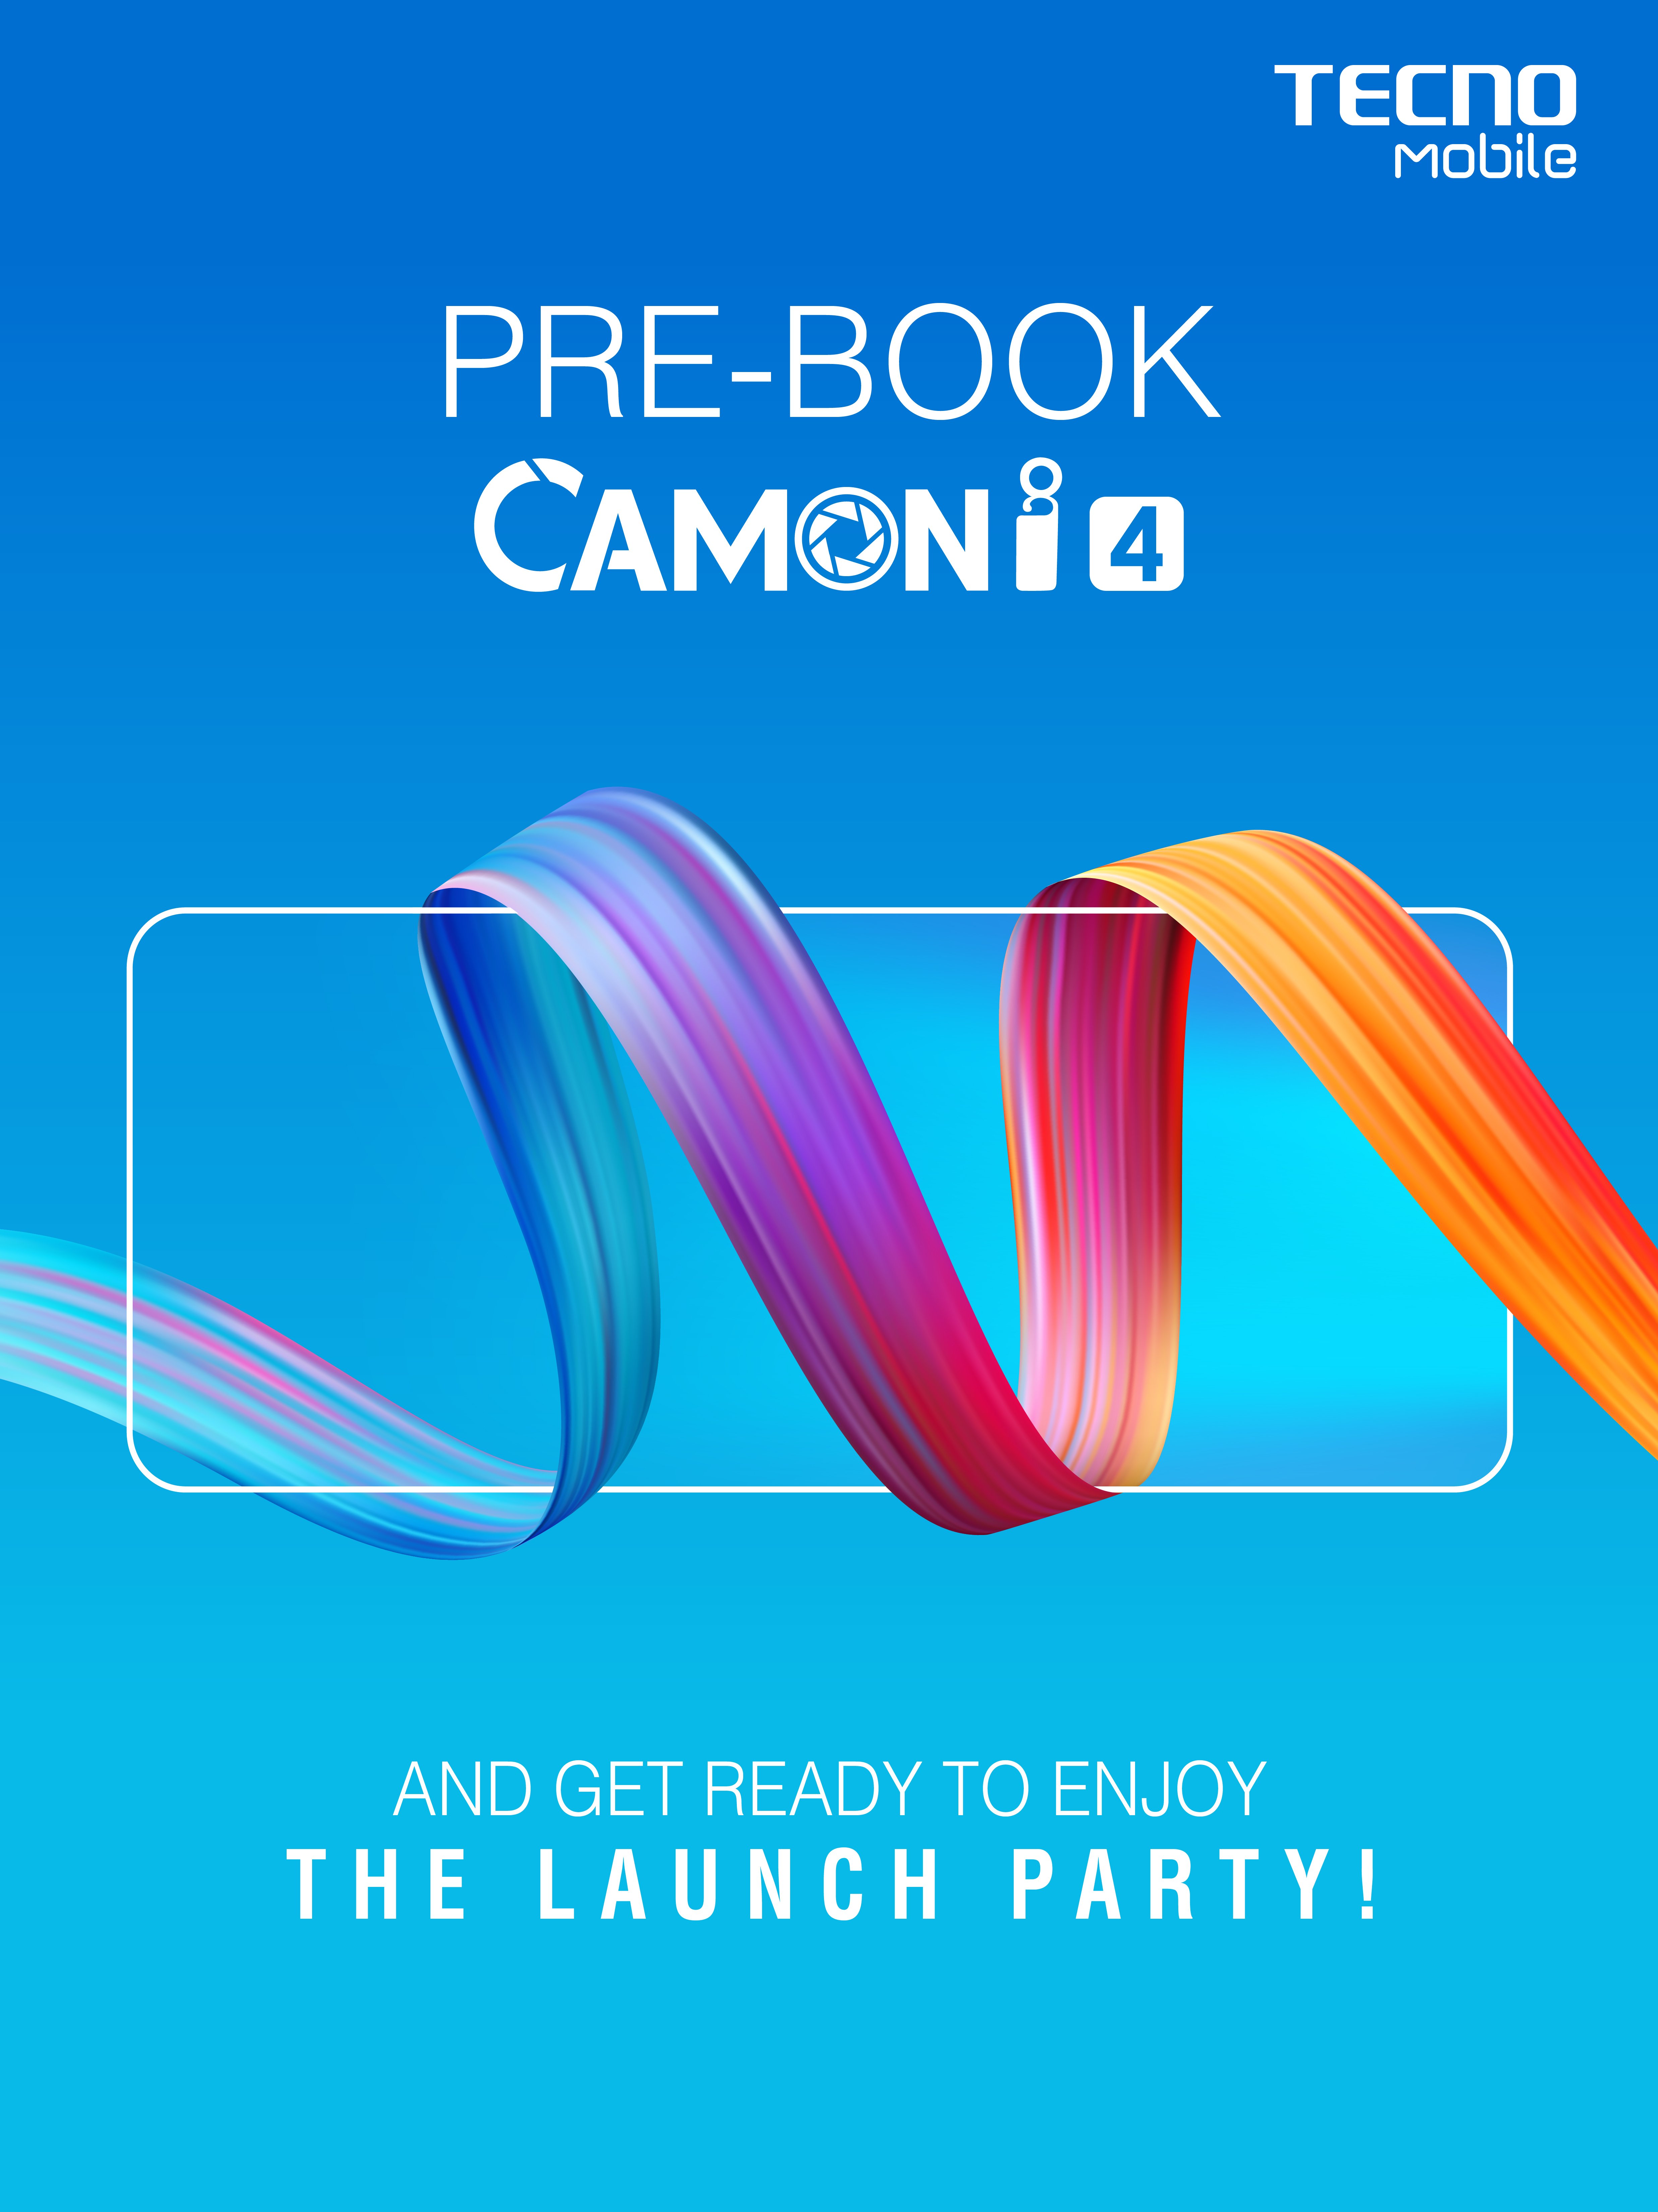 CAMON i4: First Triple Camera Phone of TECNO Ready to “Capture More Beauty” BY Pre-Booking!